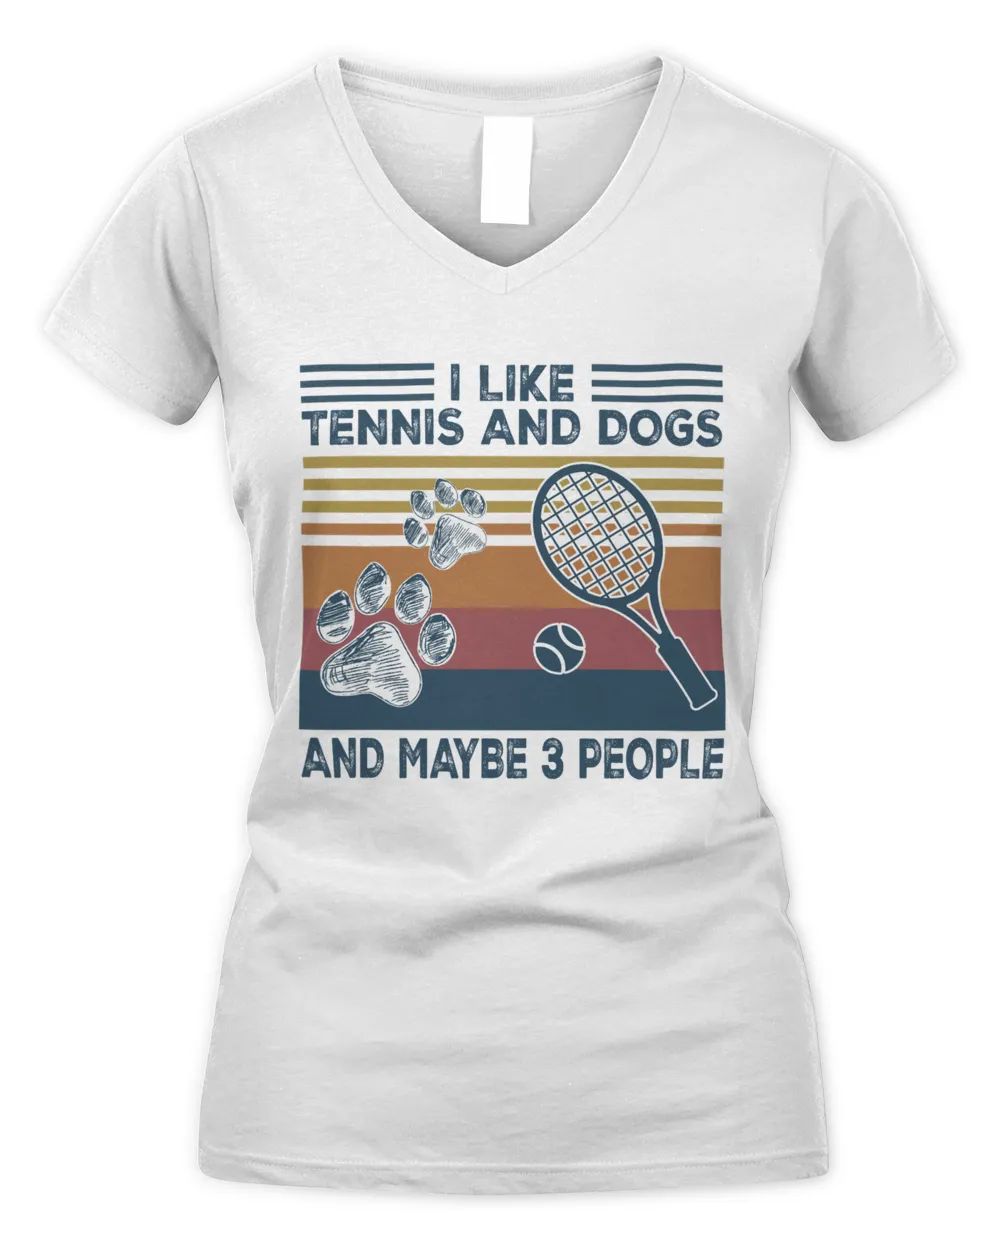 I like Tennis and dogs and maybe 3 people